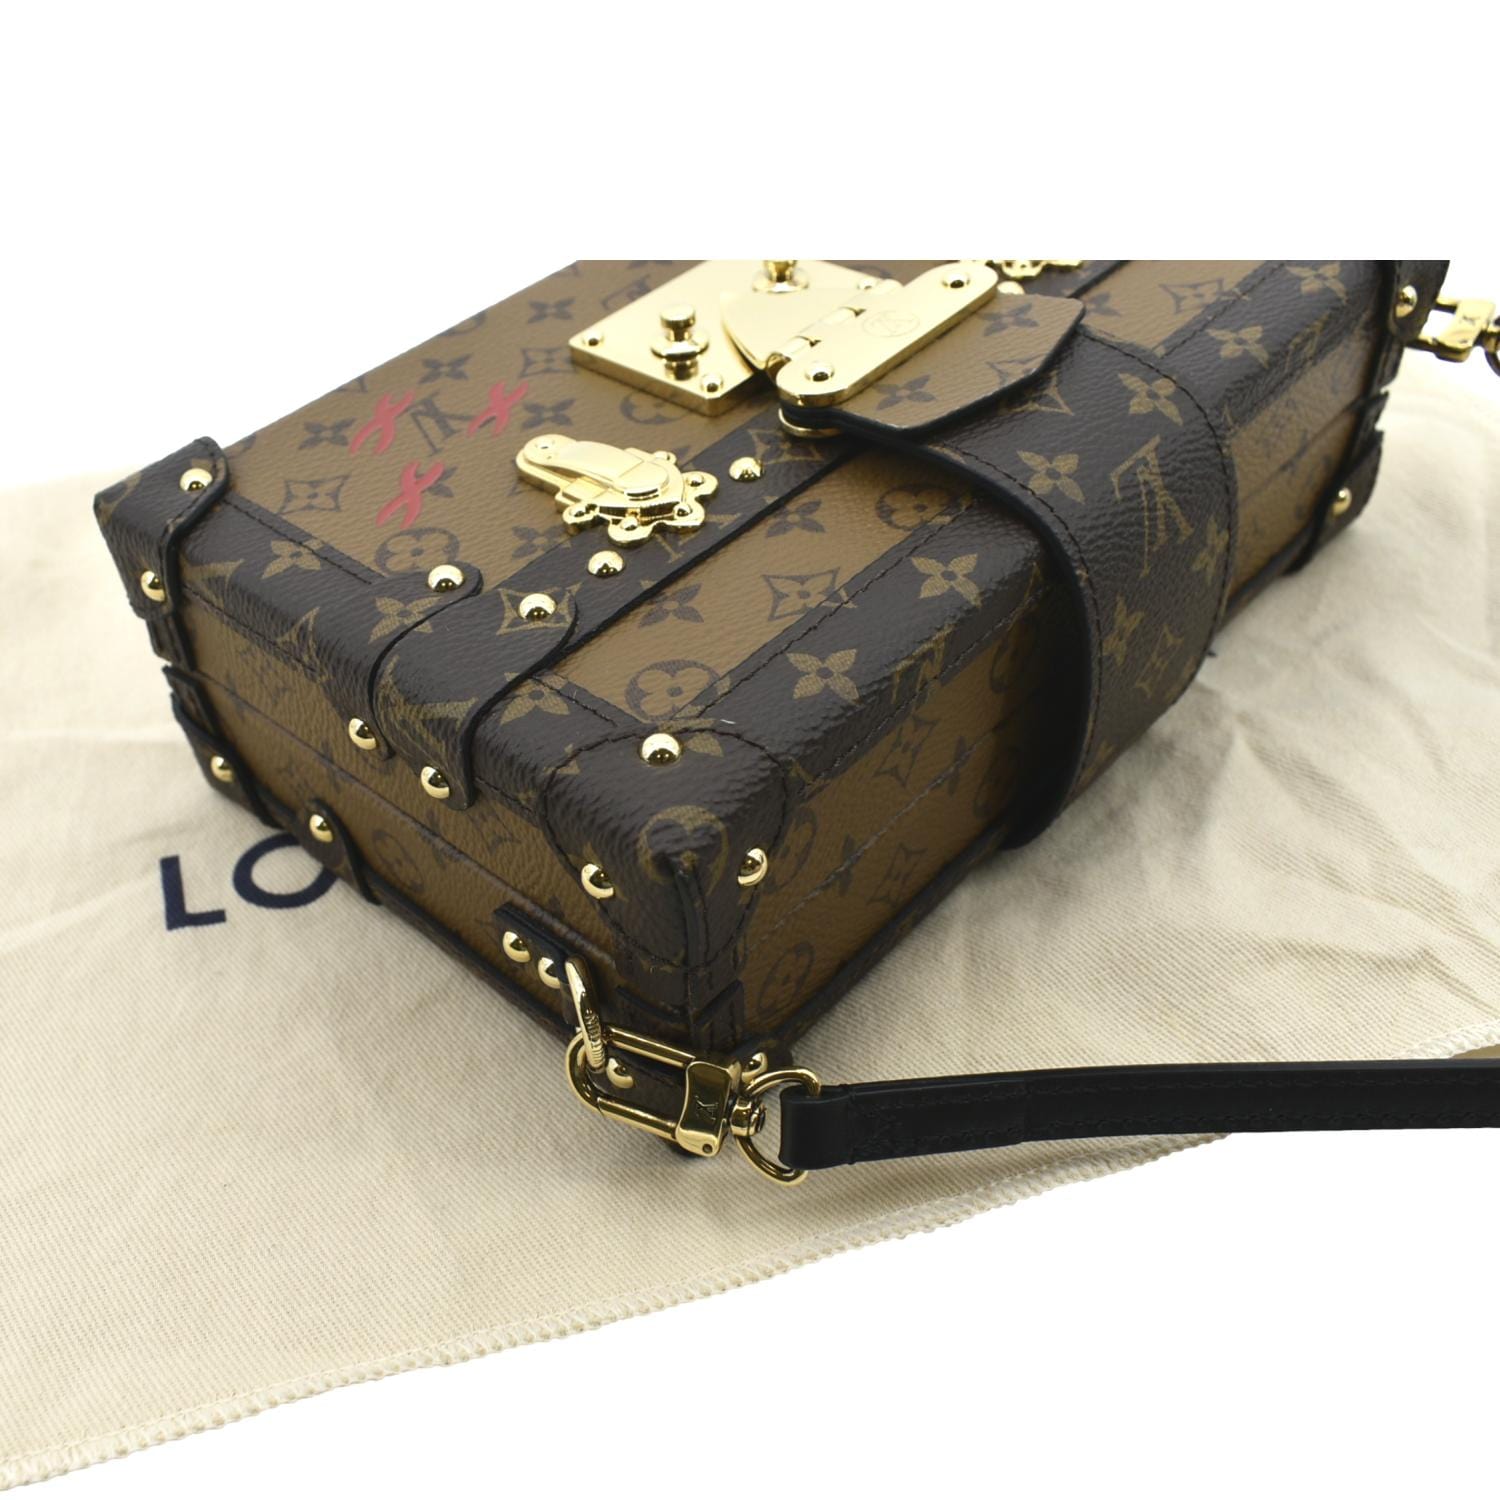 Sold at Auction: Louis Vuitton Petite Malle Strass Bag (1 of 5)